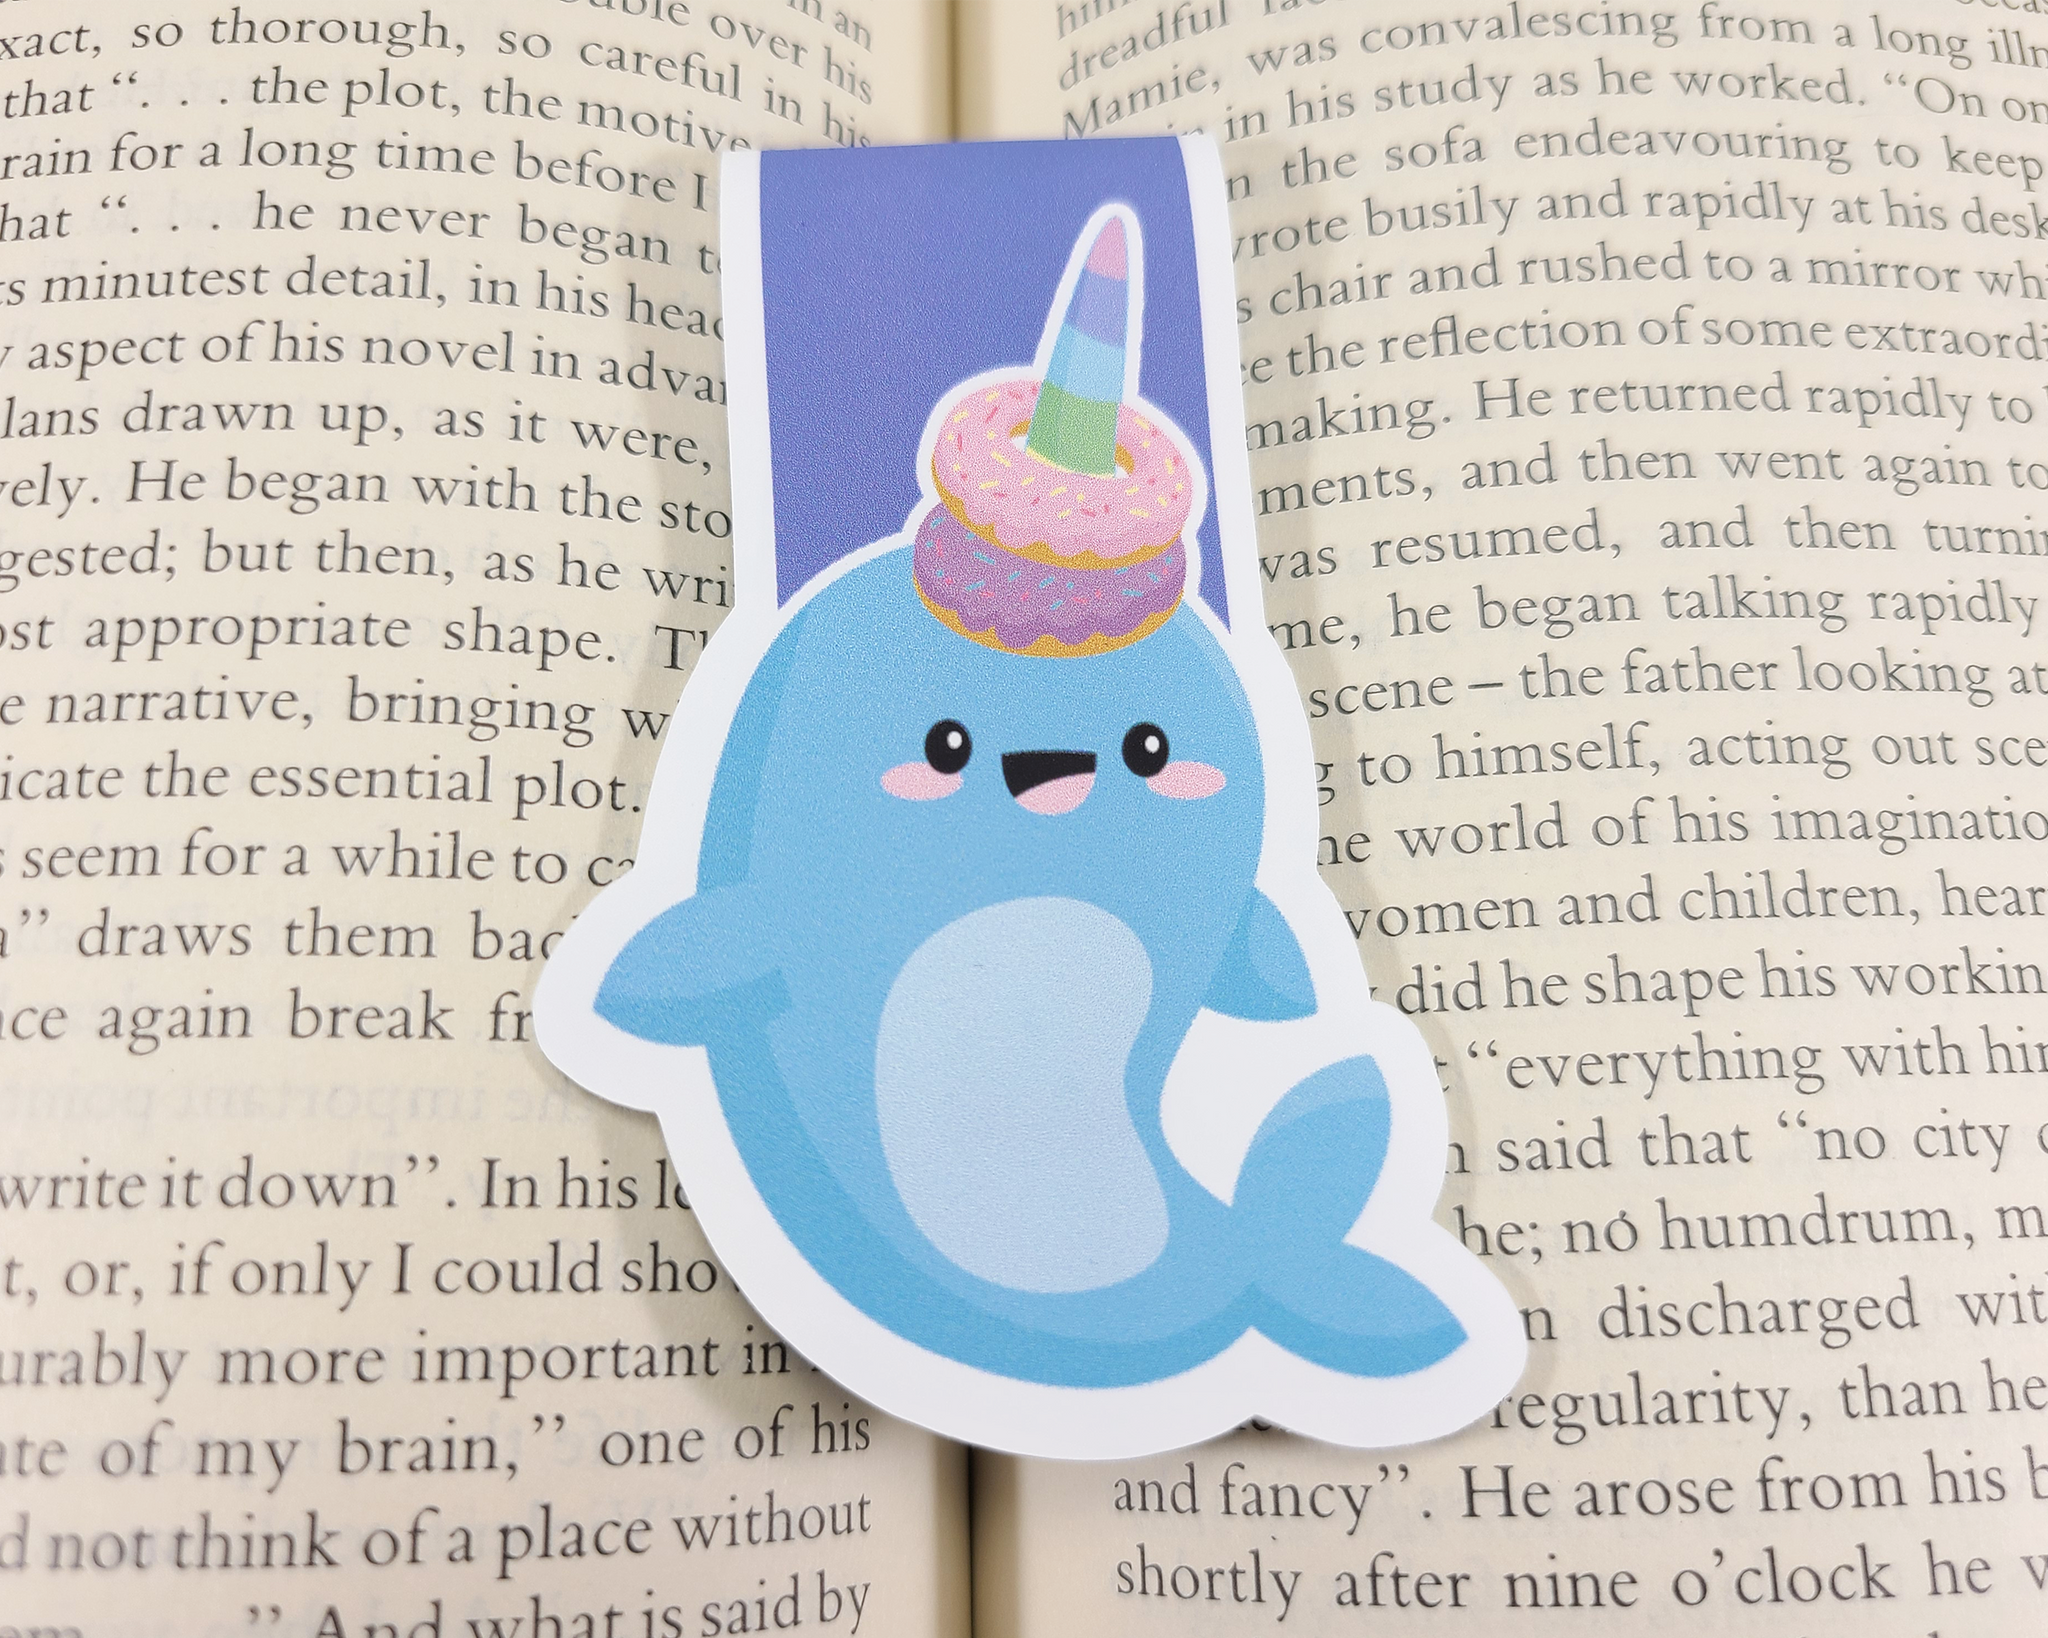 Narwhal Donut Magnetic Bookmark